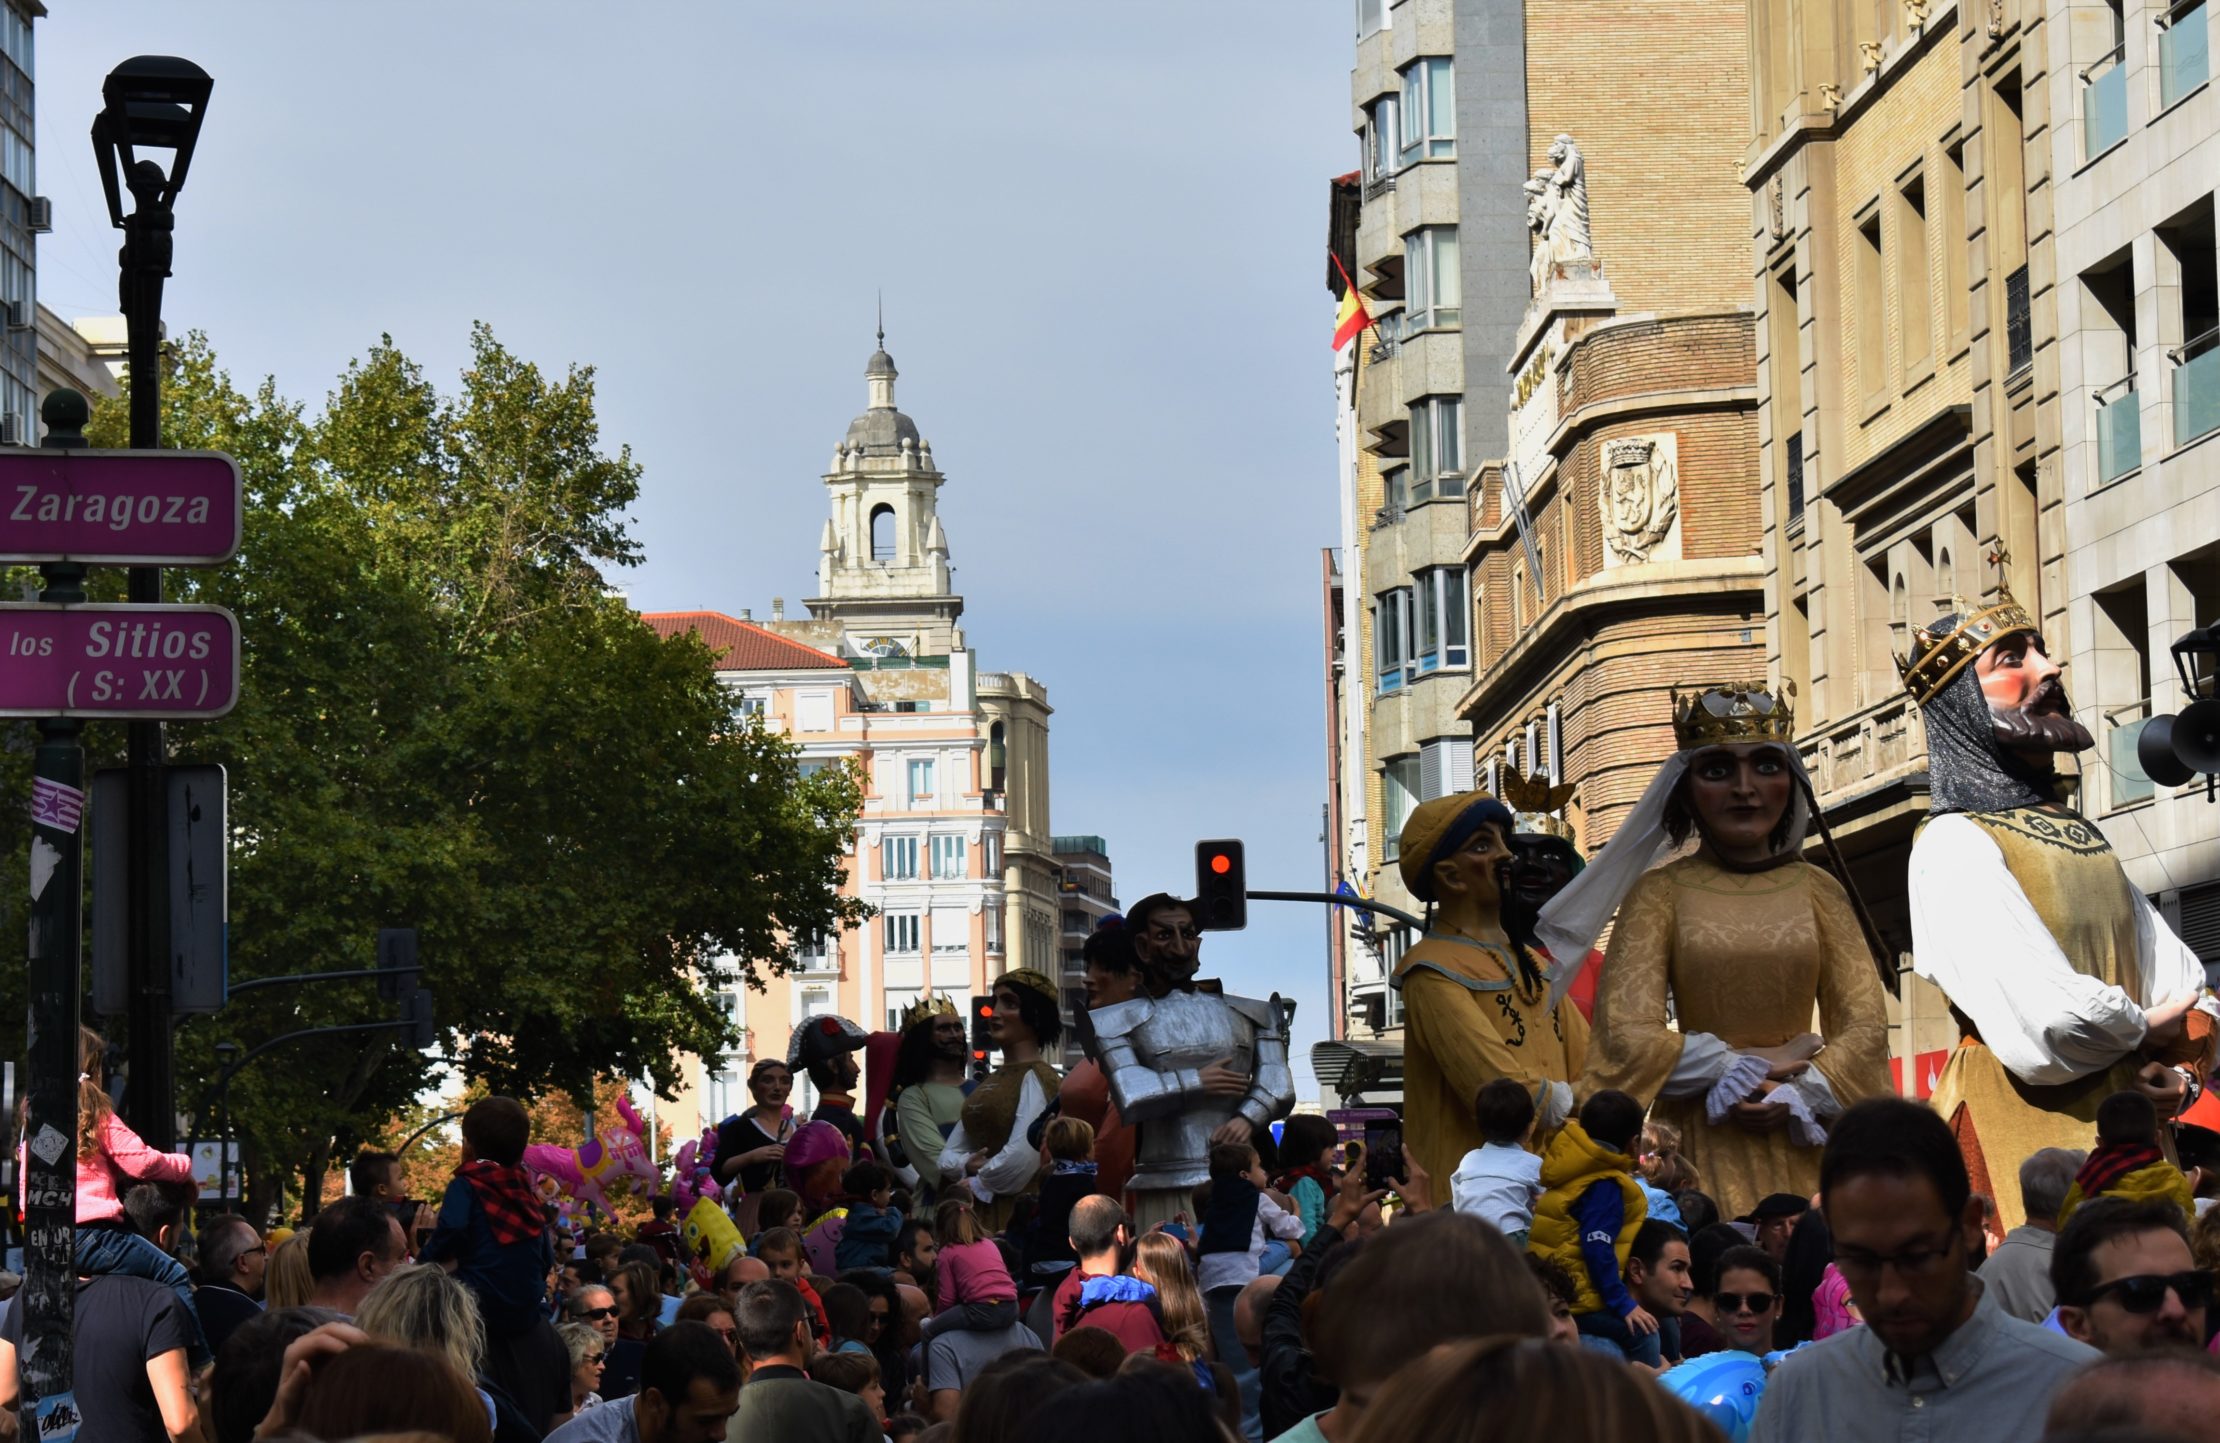 Parade of Giants during the Fiestas del Pilar are very popular among children